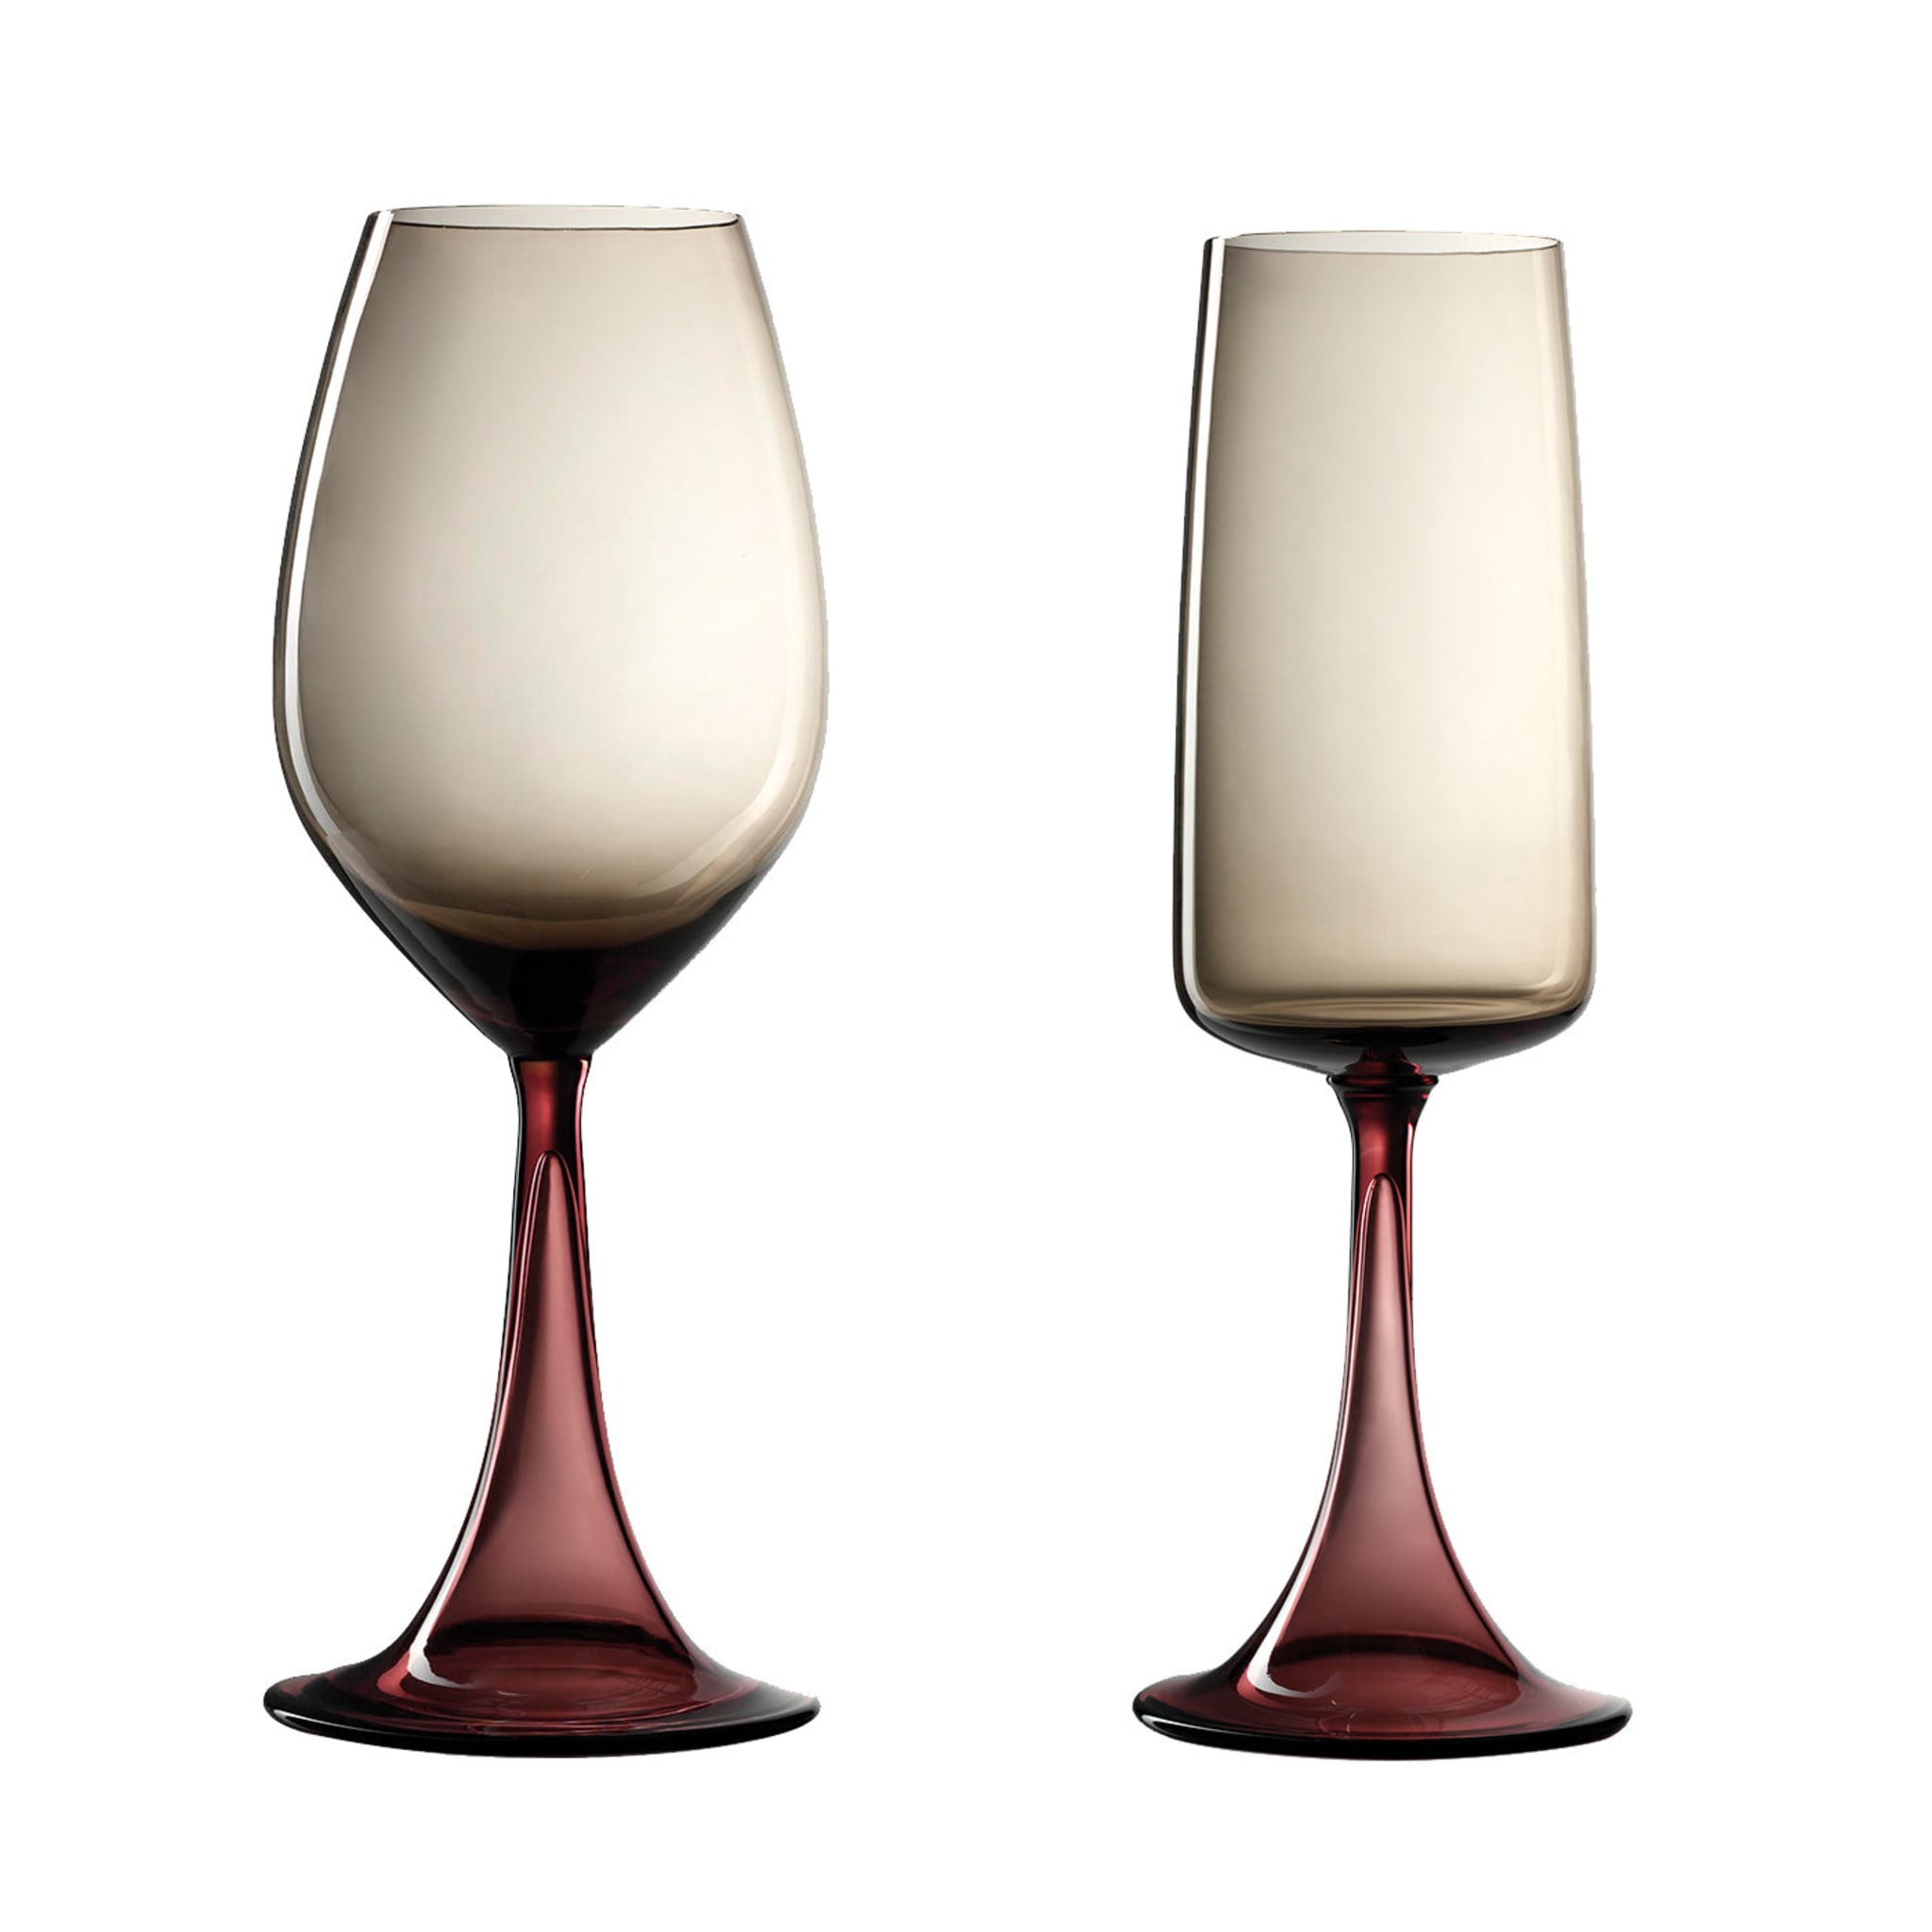 Mille e Una Notte Set of Chardonnay and Pinot Noir Burgundy Wine Glasses by NasonMoretti and Stefano Marcato - Main view